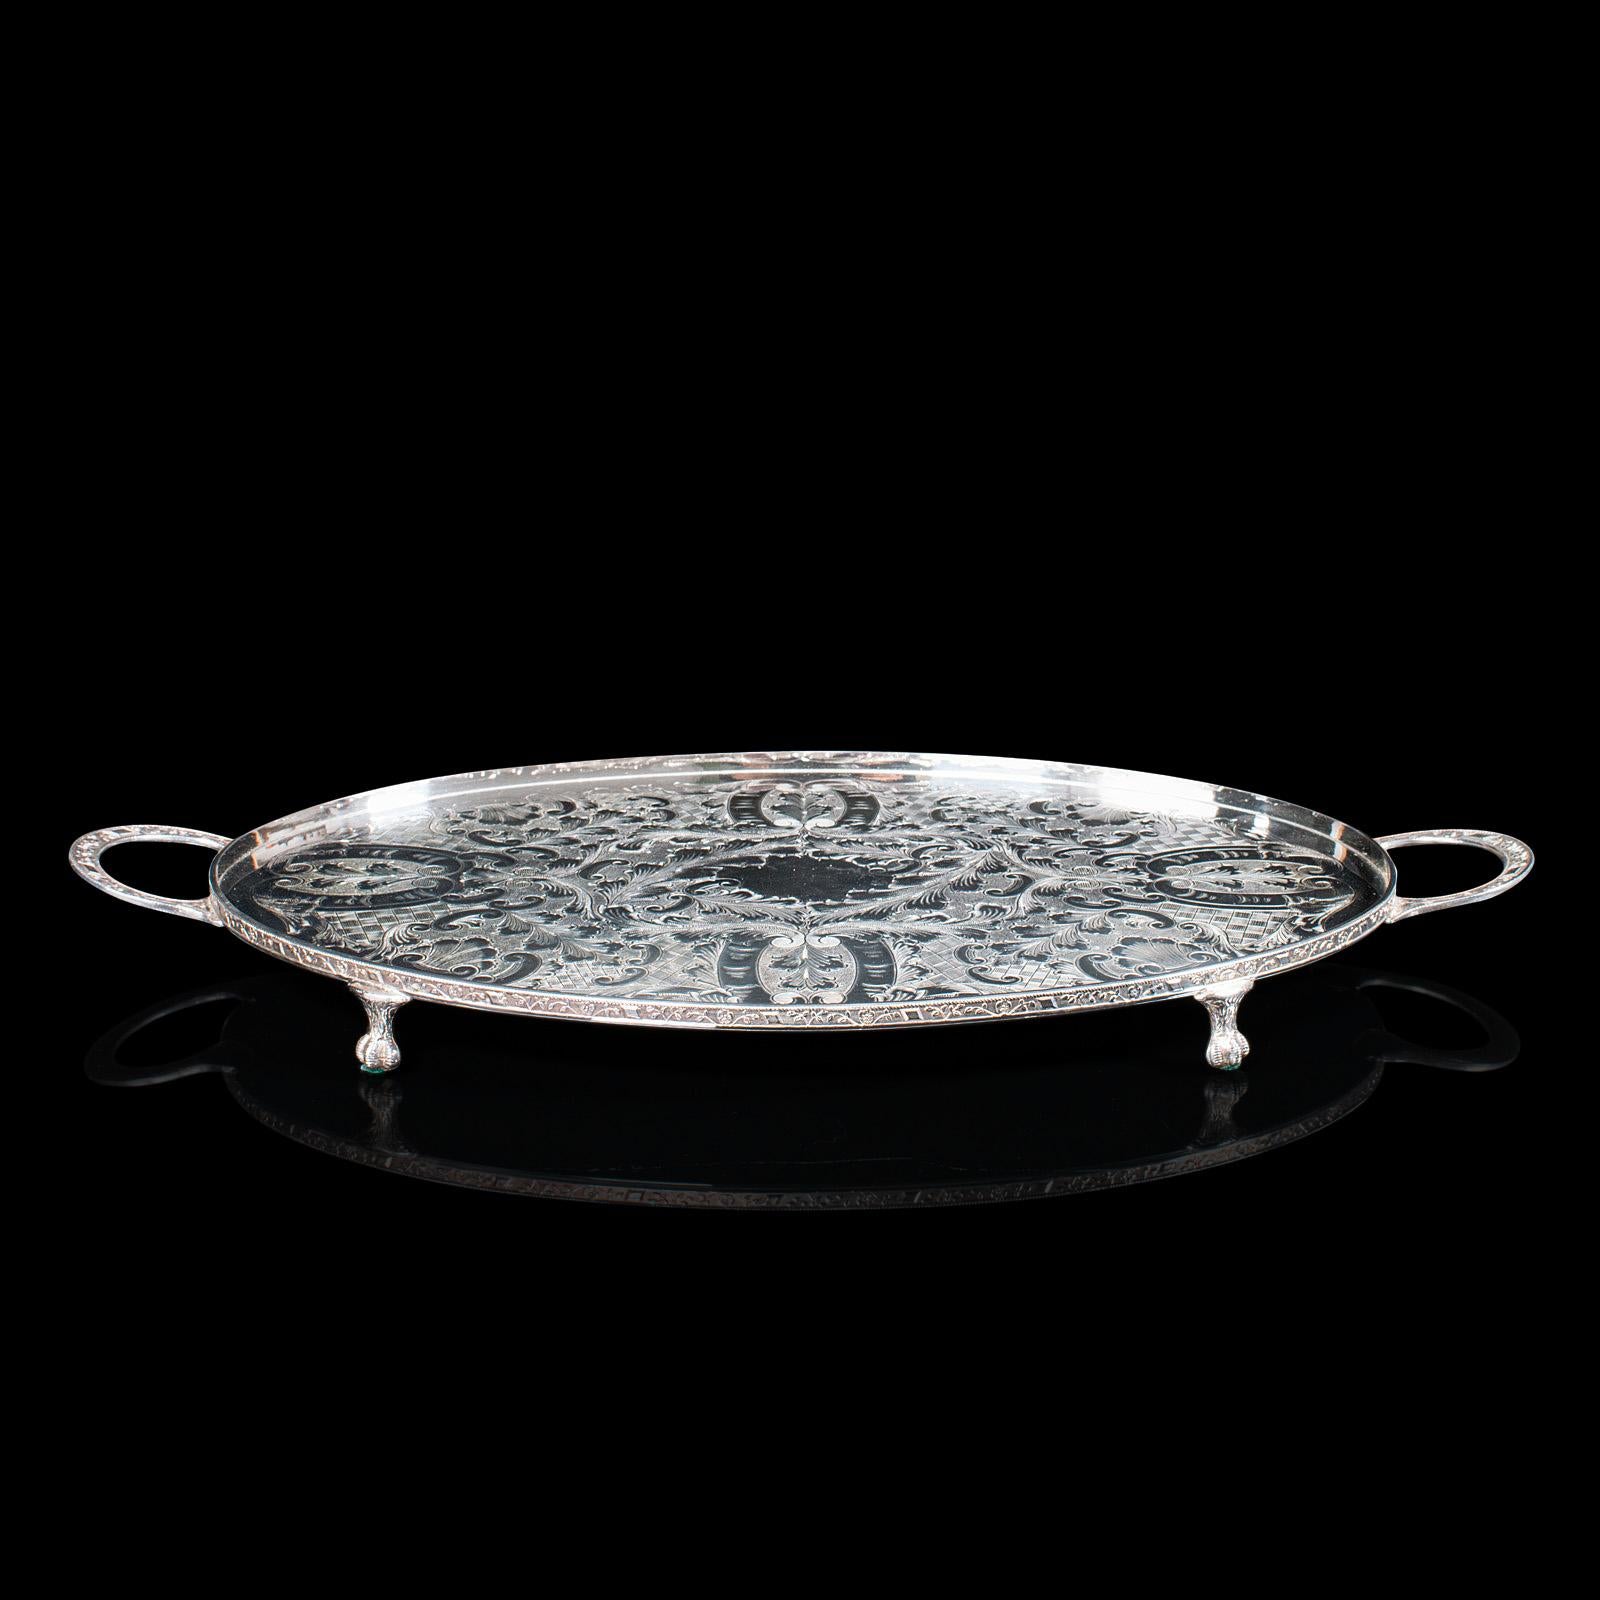 This is a vintage oval serving tray. An English, silver plated afternoon tea platter by Viners of Sheffield, dating to the mid 20th century, circa 1950.

Strikingly detailed and desirably ornate tray
Displaying a desirable aged patina and in good